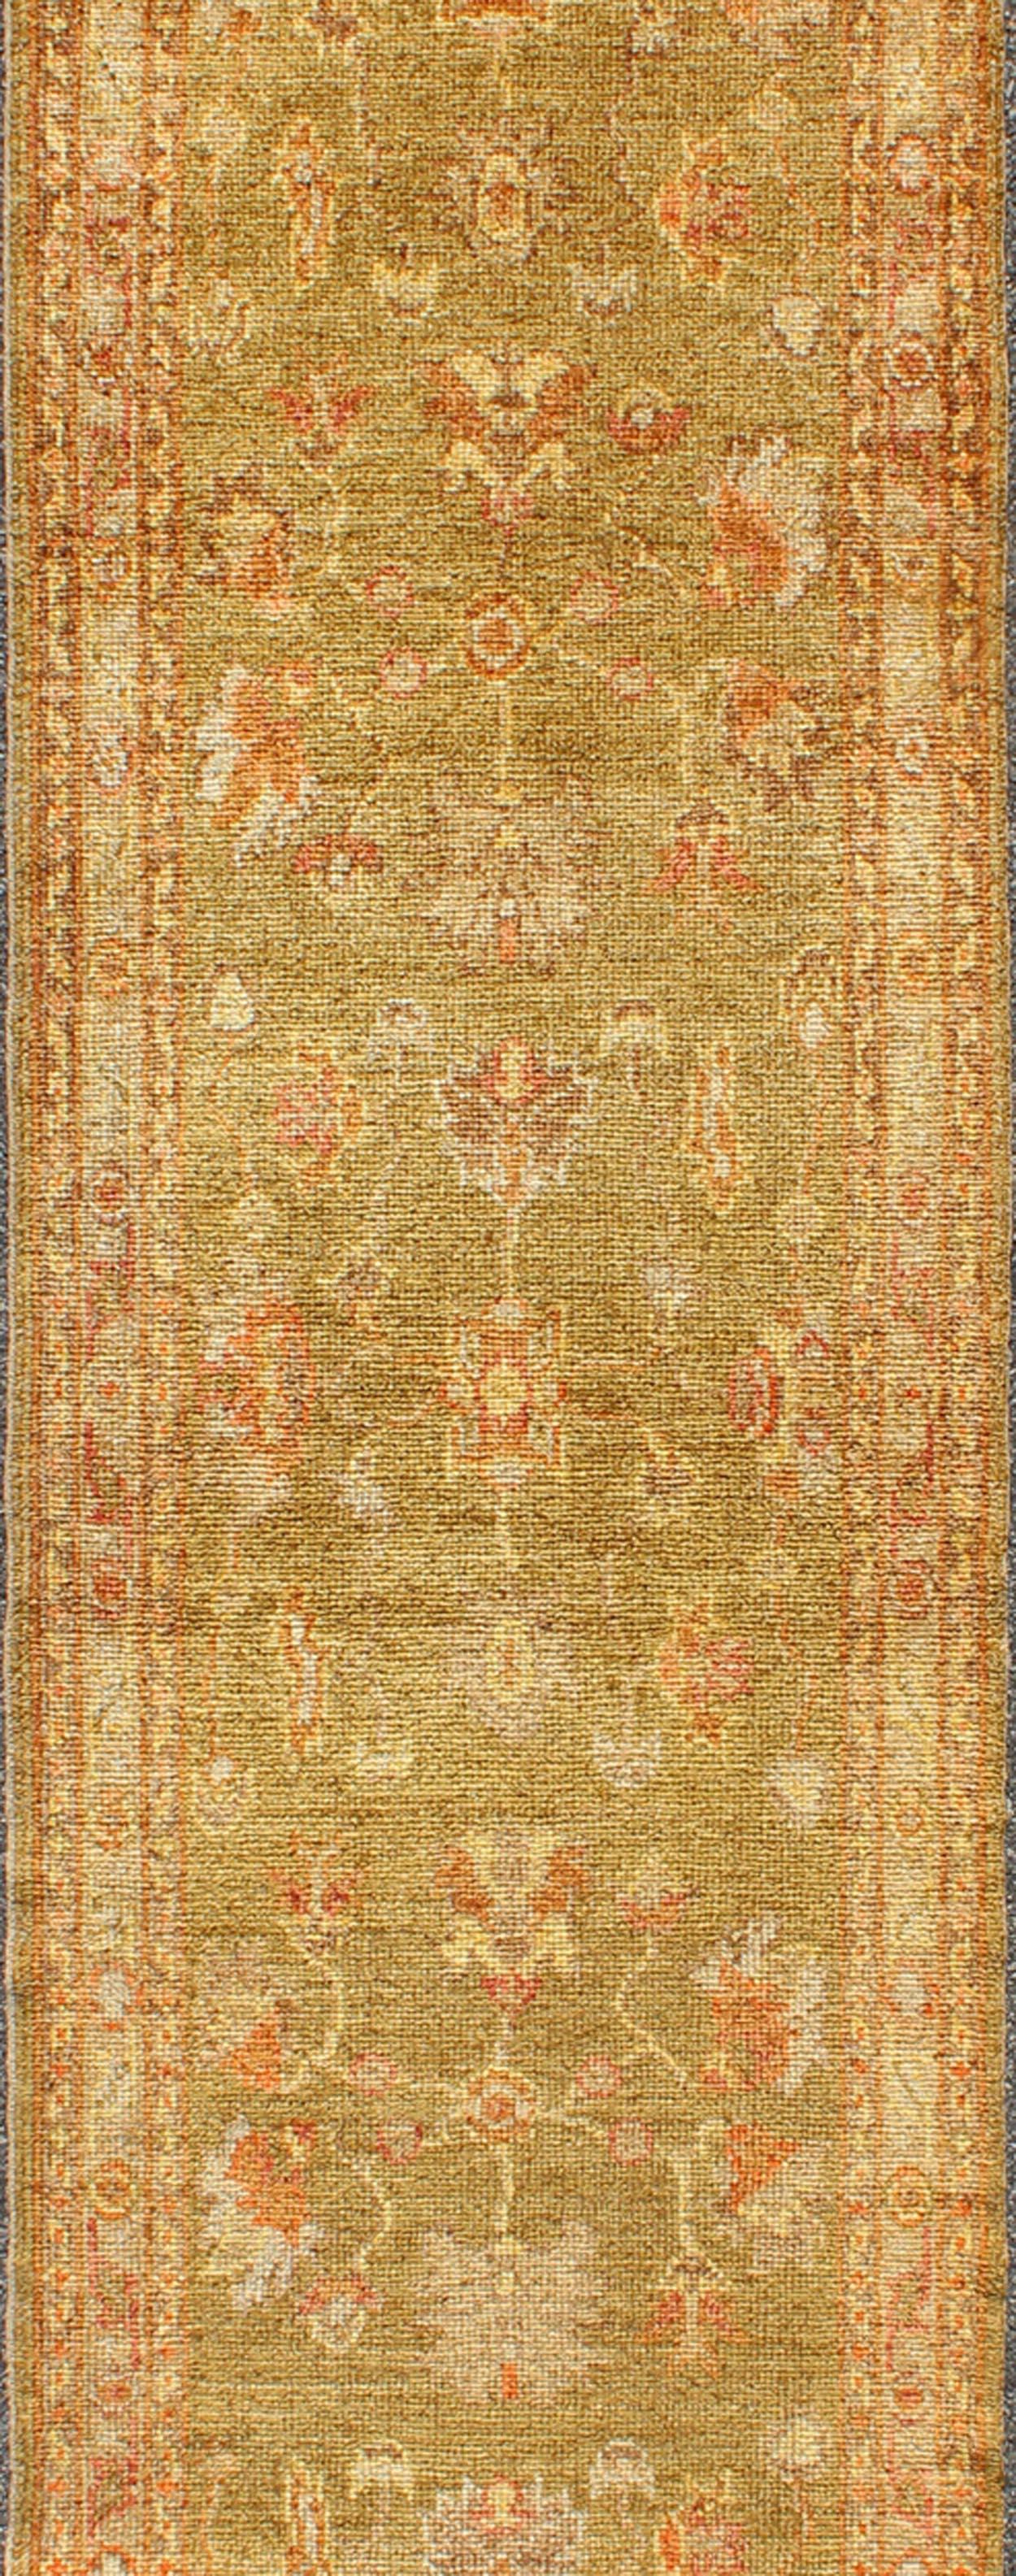 Turkish Oushak runner with traditional motifs and elegant traditional medallion design, rug AN-105339, country of origin / type: Turkey / Oushak

This traditional Oushak runner from Turkey features a subdued, color palette and an elegant design,